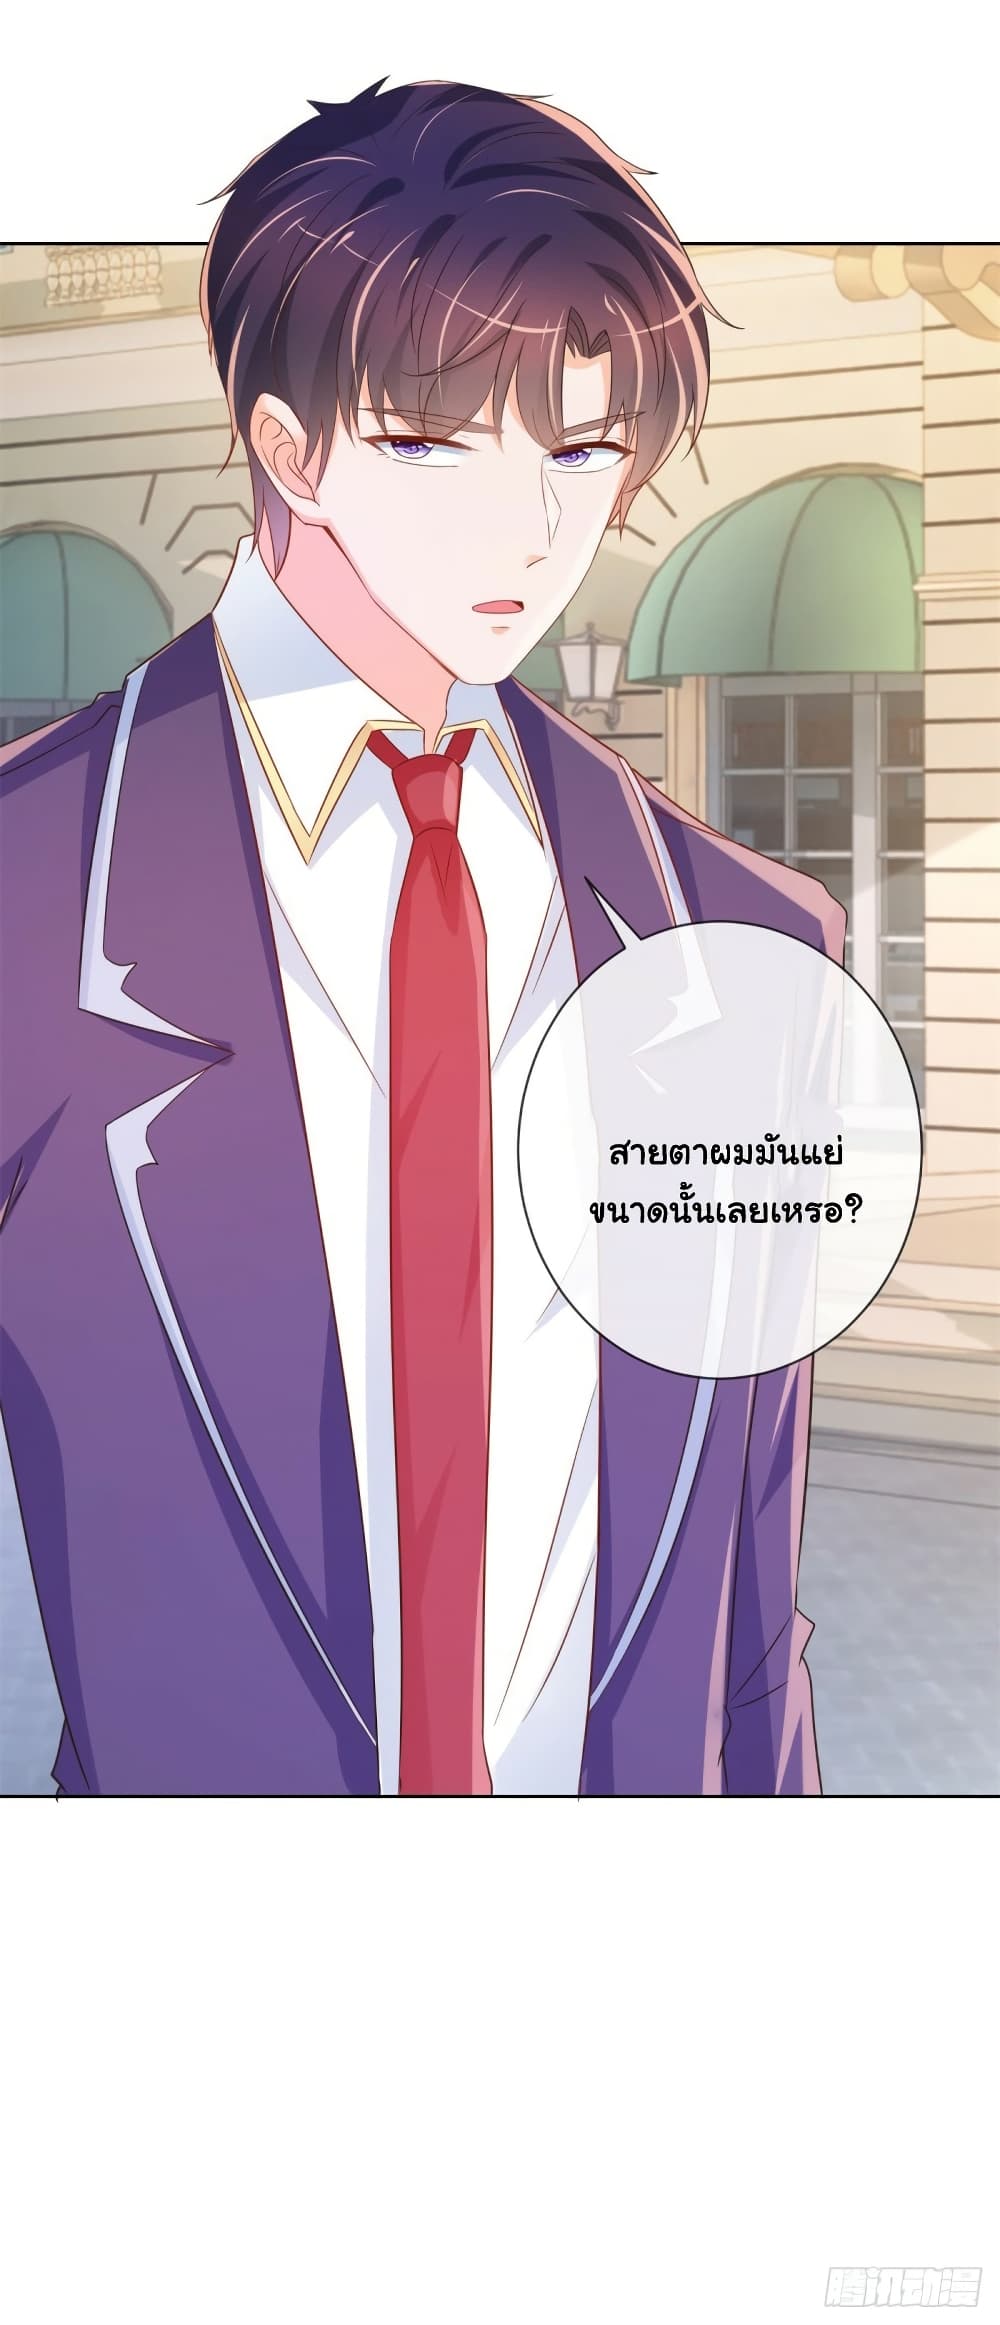 The Lovely Wife And Strange Marriage à¹à¸œà¸™à¸£à¸±à¸à¸¥à¸§à¸‡à¹ƒà¸ˆ 322 (33)